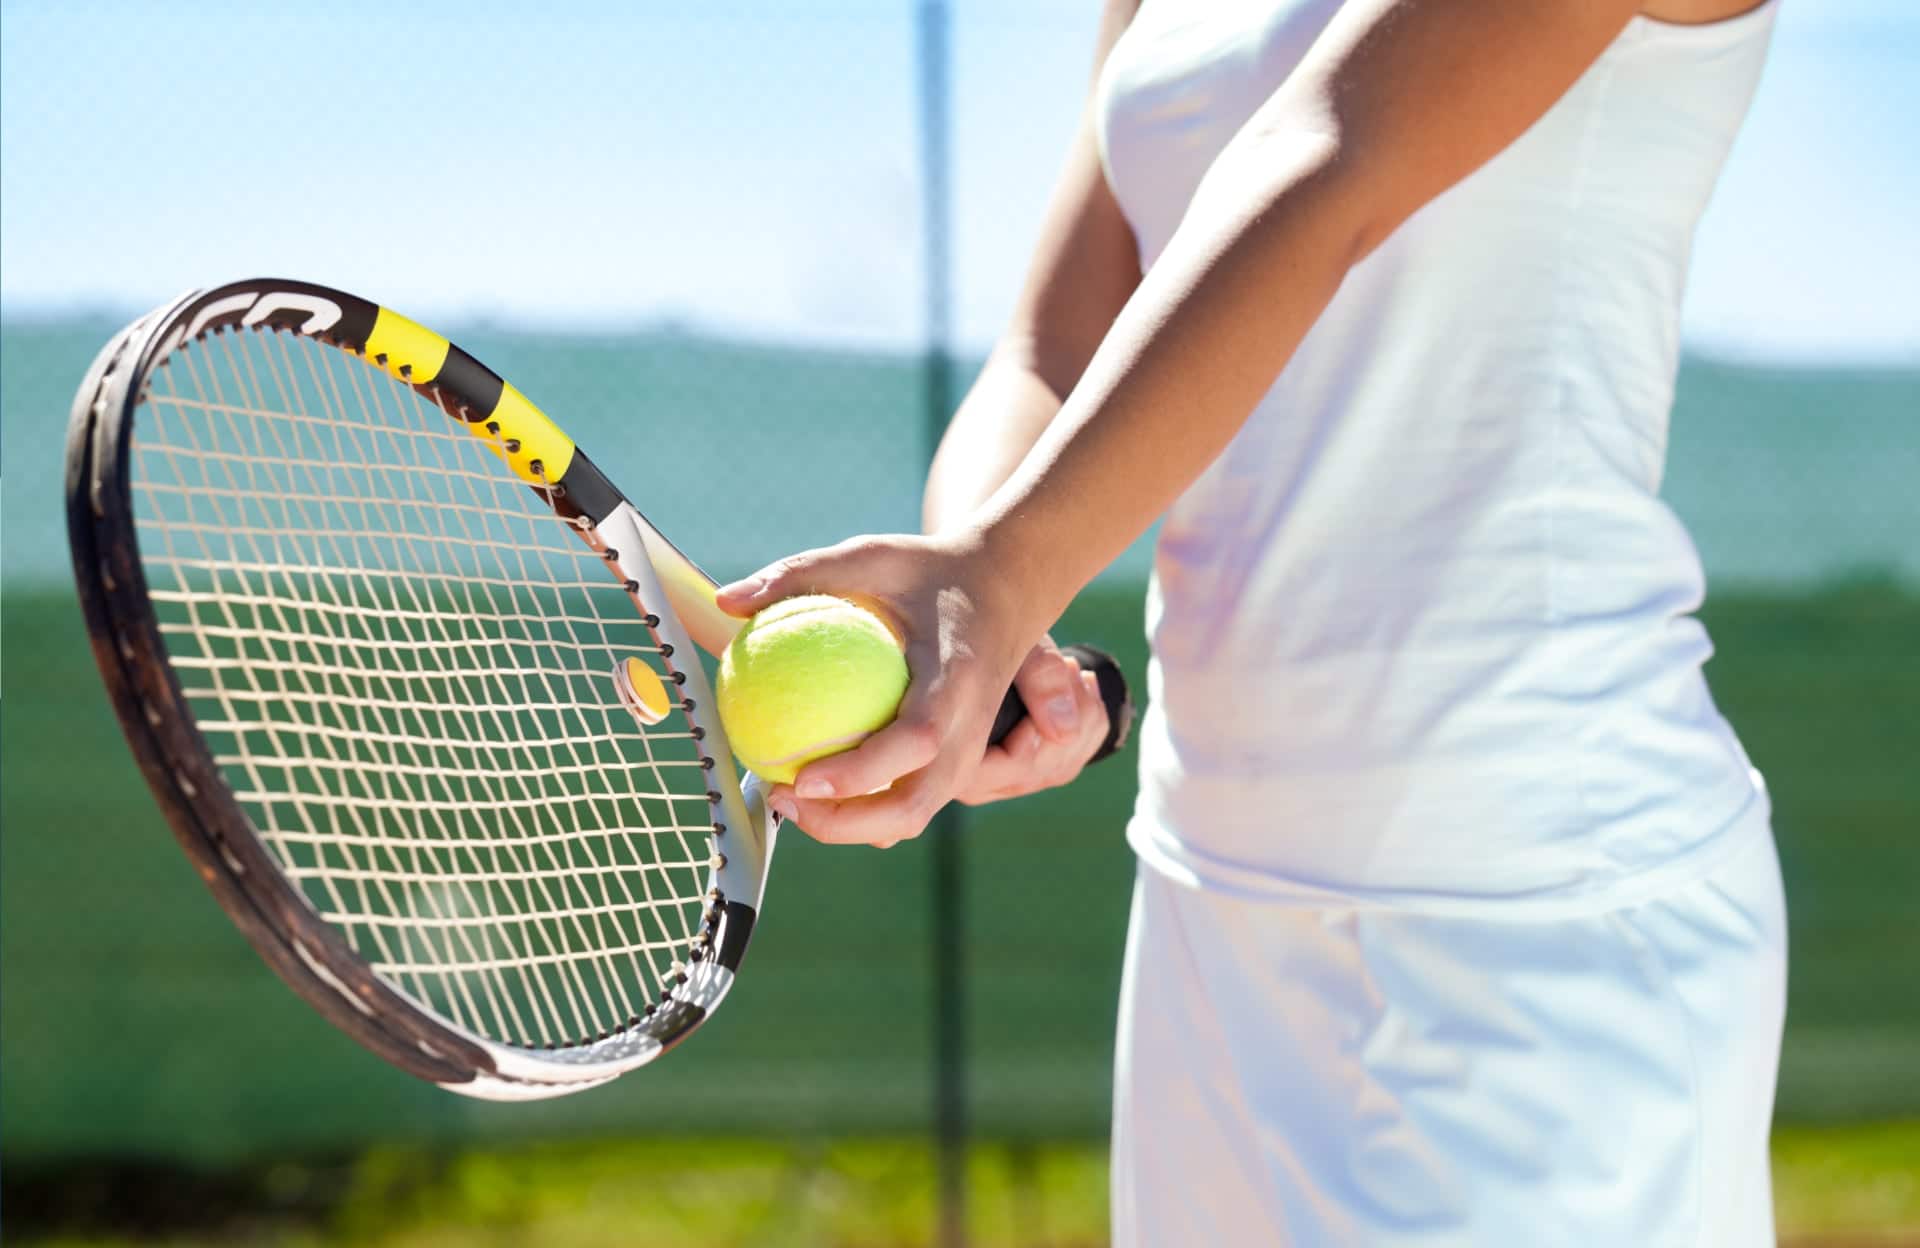 9 Games Similar To Tennis That Will Get You Moving